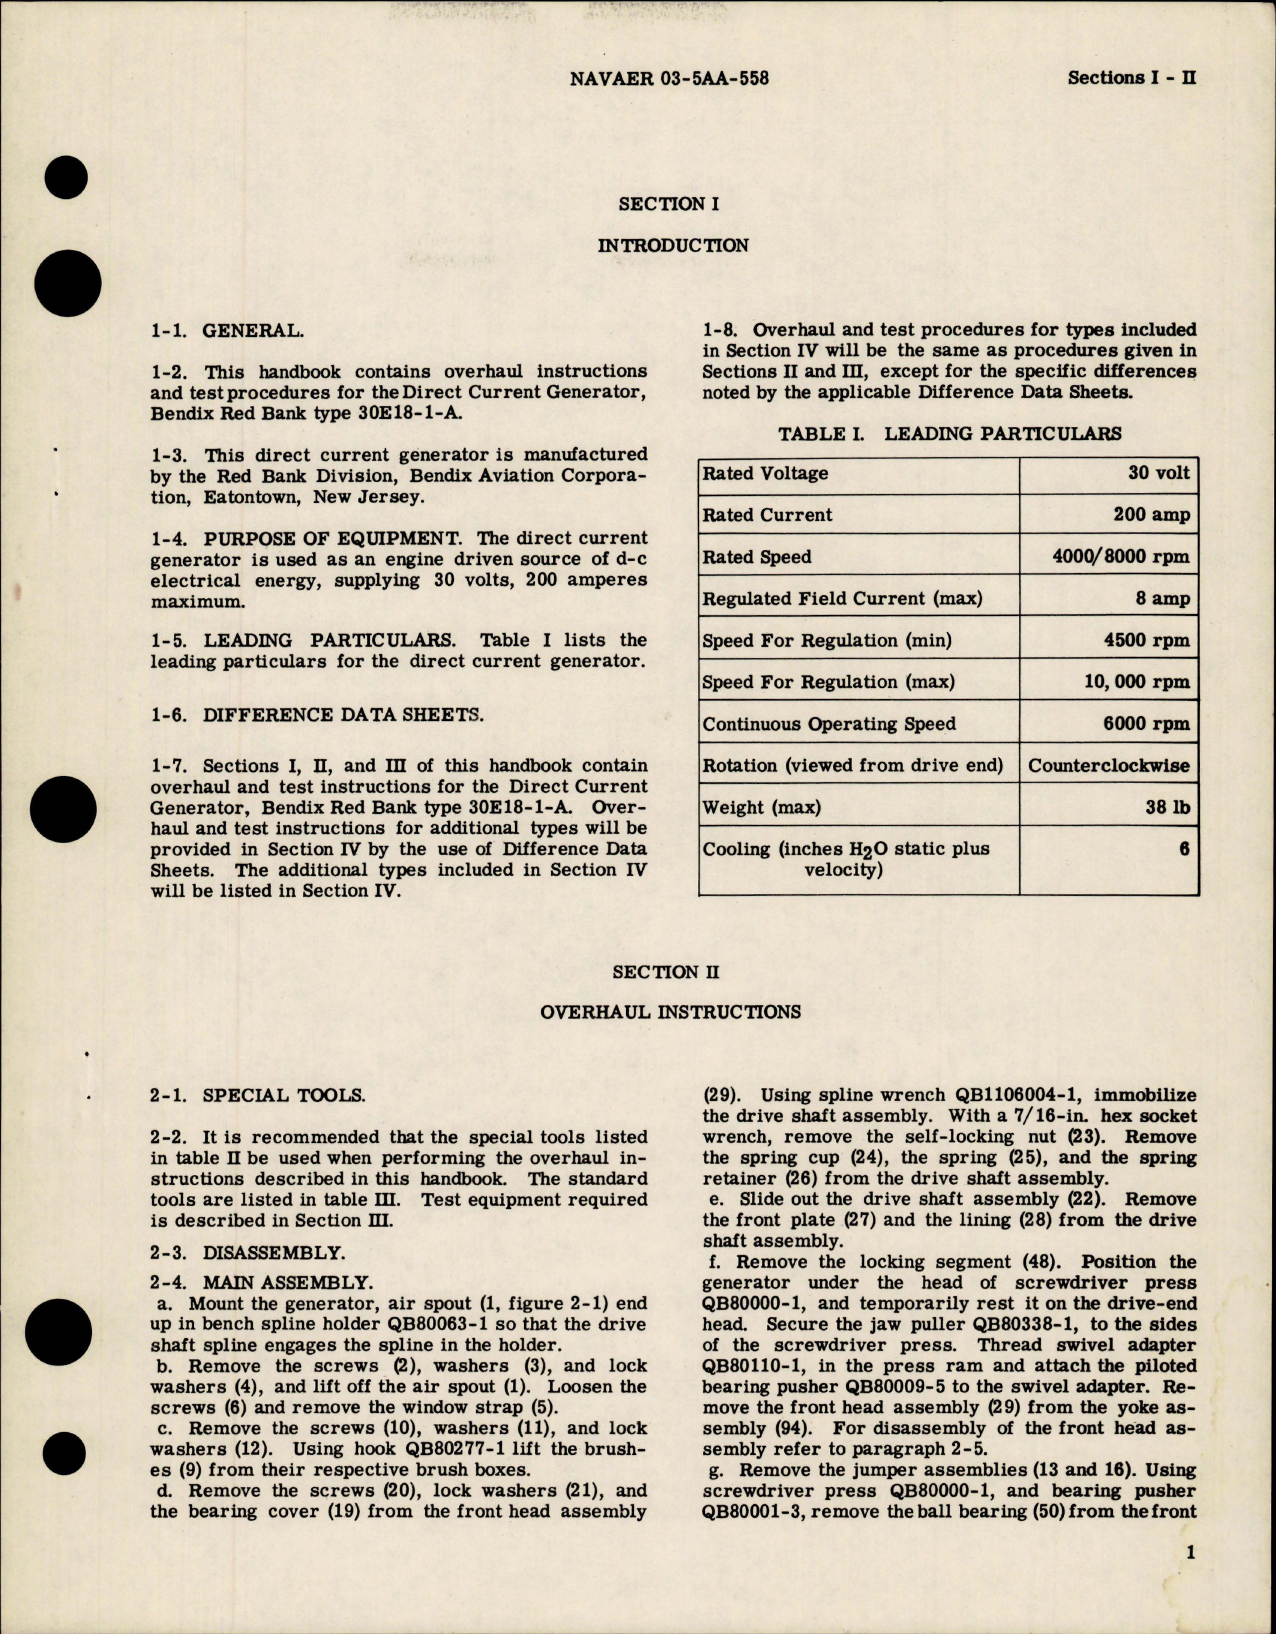 Sample page 5 from AirCorps Library document: Overhaul Instructions for Direct Current Generator - Part 30E18-1-A 